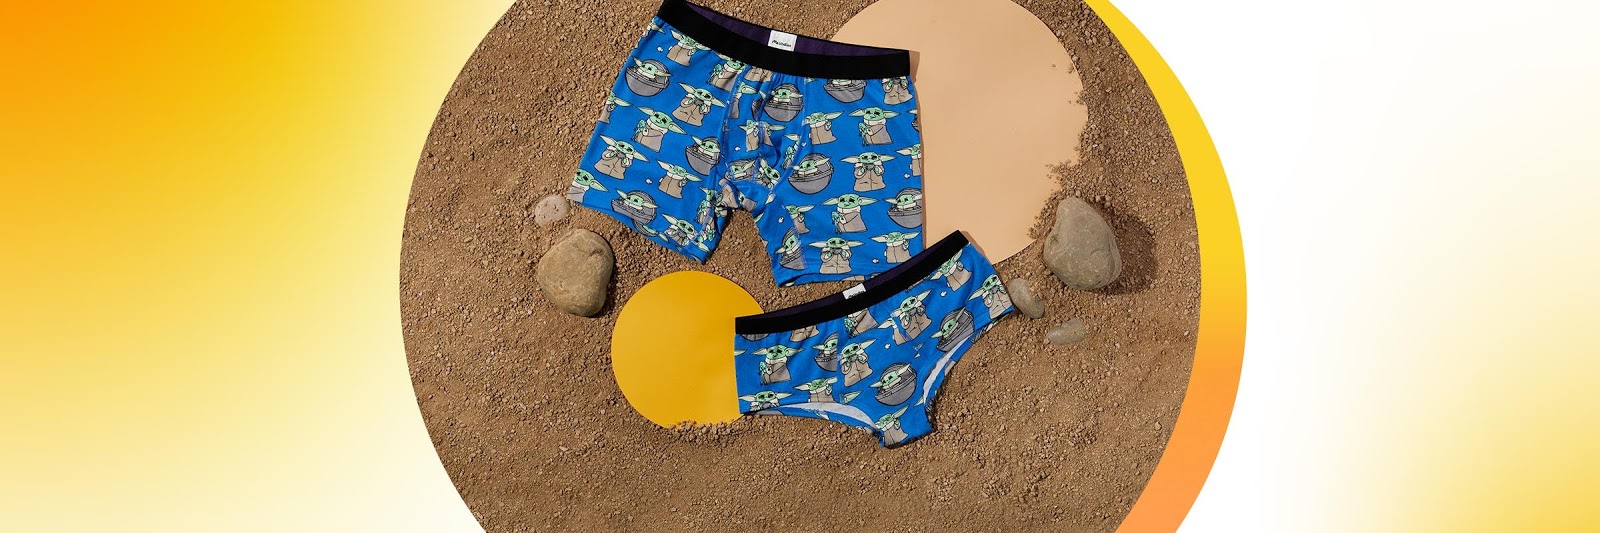 MeUndies just released matching Star Wars underwear and they are